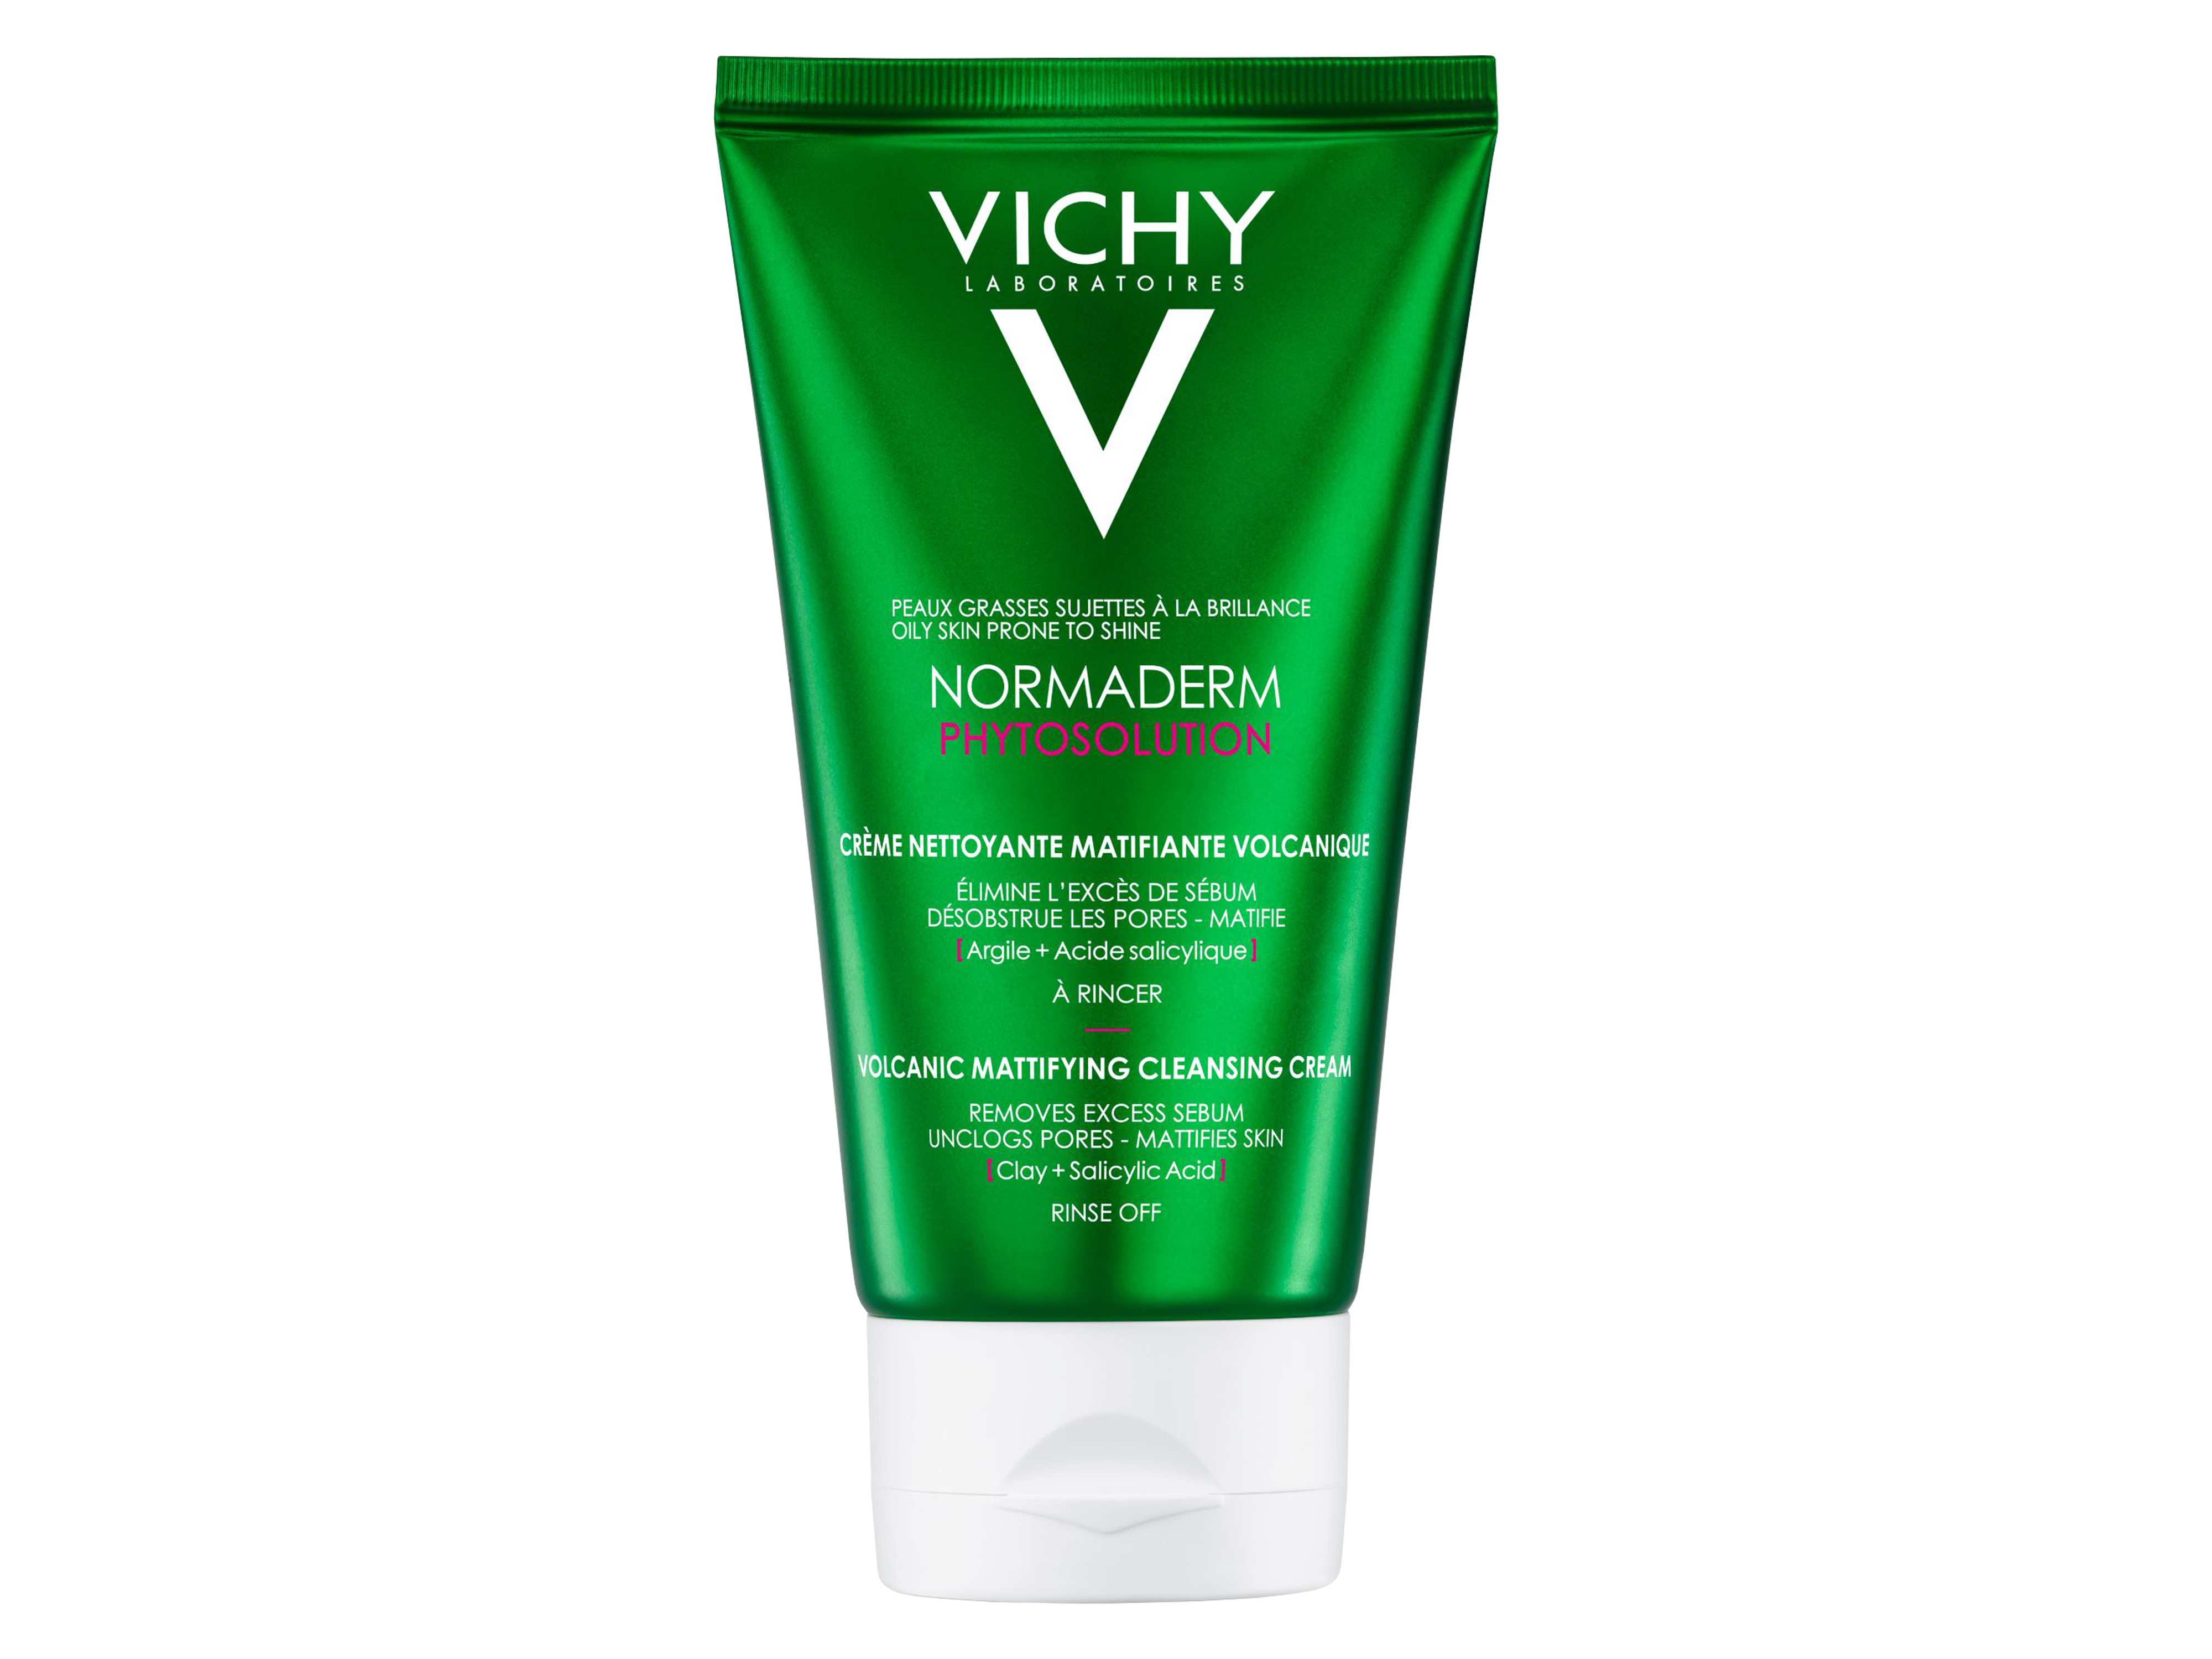 Vichy Normaderm Phytosolution Volcanic Matiifying Cleanser, 125 ml